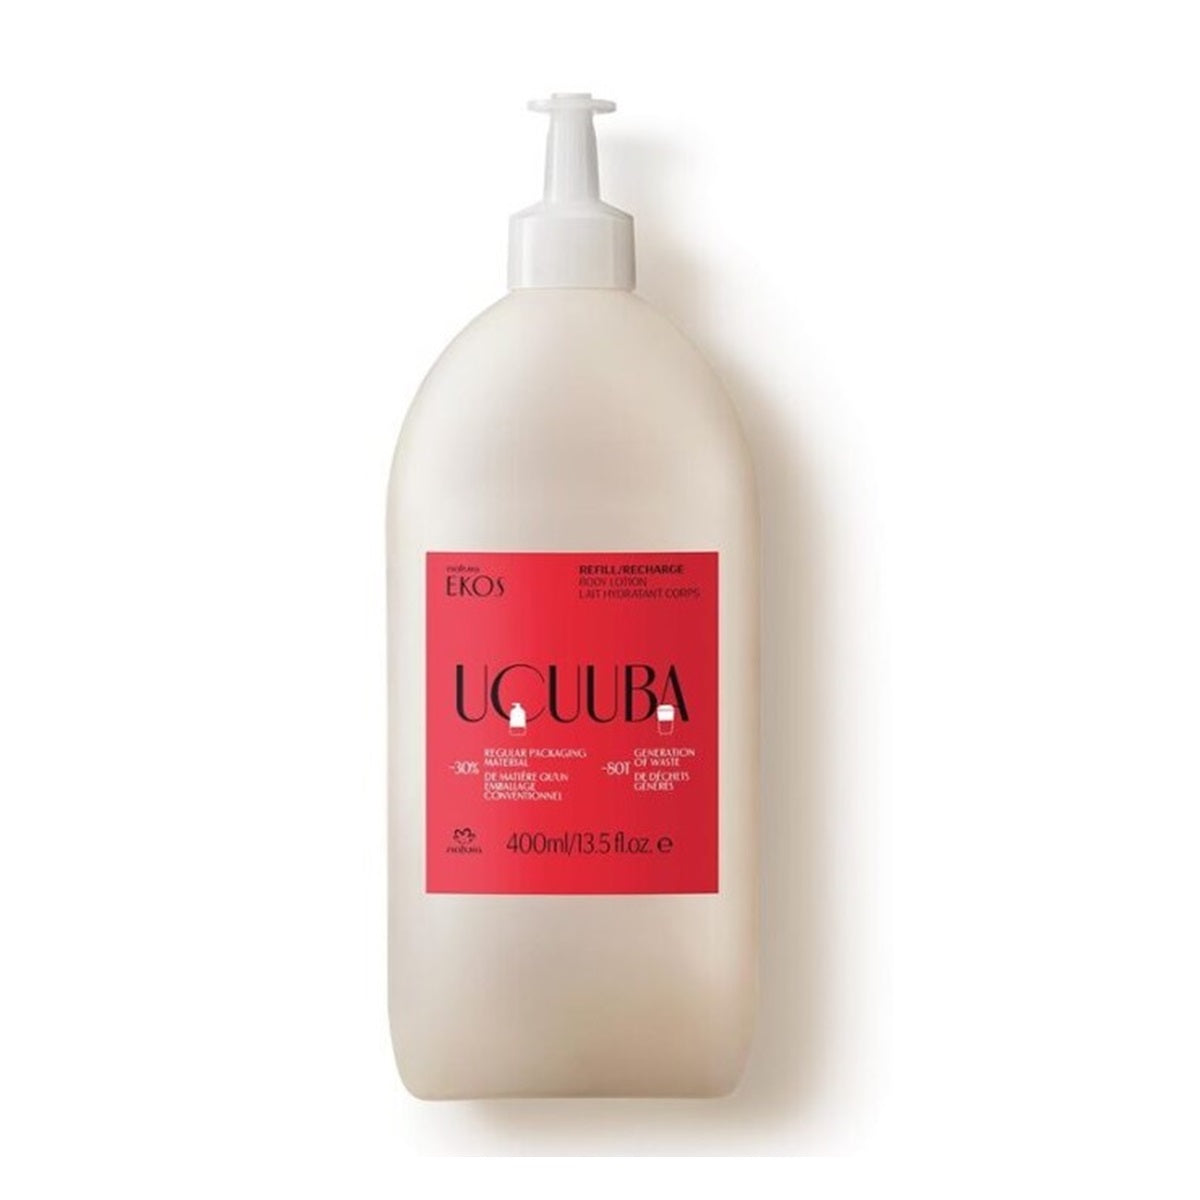 Ucuuba Firming and Repairing Body Lotion Refill 400ml